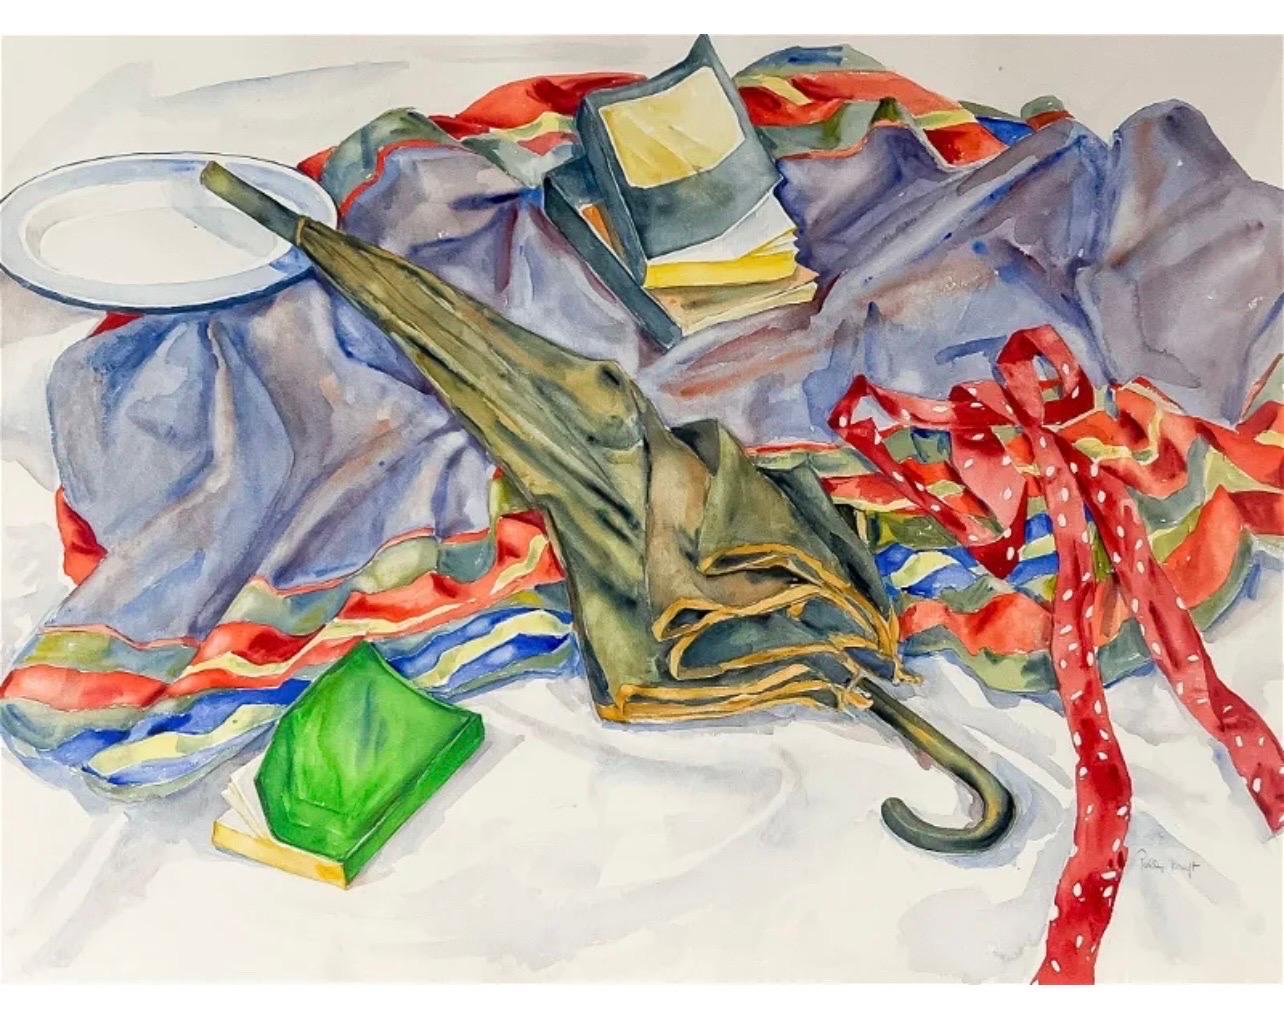 Polly Kraft
American (1928-2017)
Umbrella Still Life (1984)
watercolor on paper
signed lower right
29 1/2 x 41 1/2 inches
frame dimensions: 33 x 45 1/4 x 1 1/2 inches, wood frame with acrylic glazing

Provenance: East Hampton Collection 
Fischbach